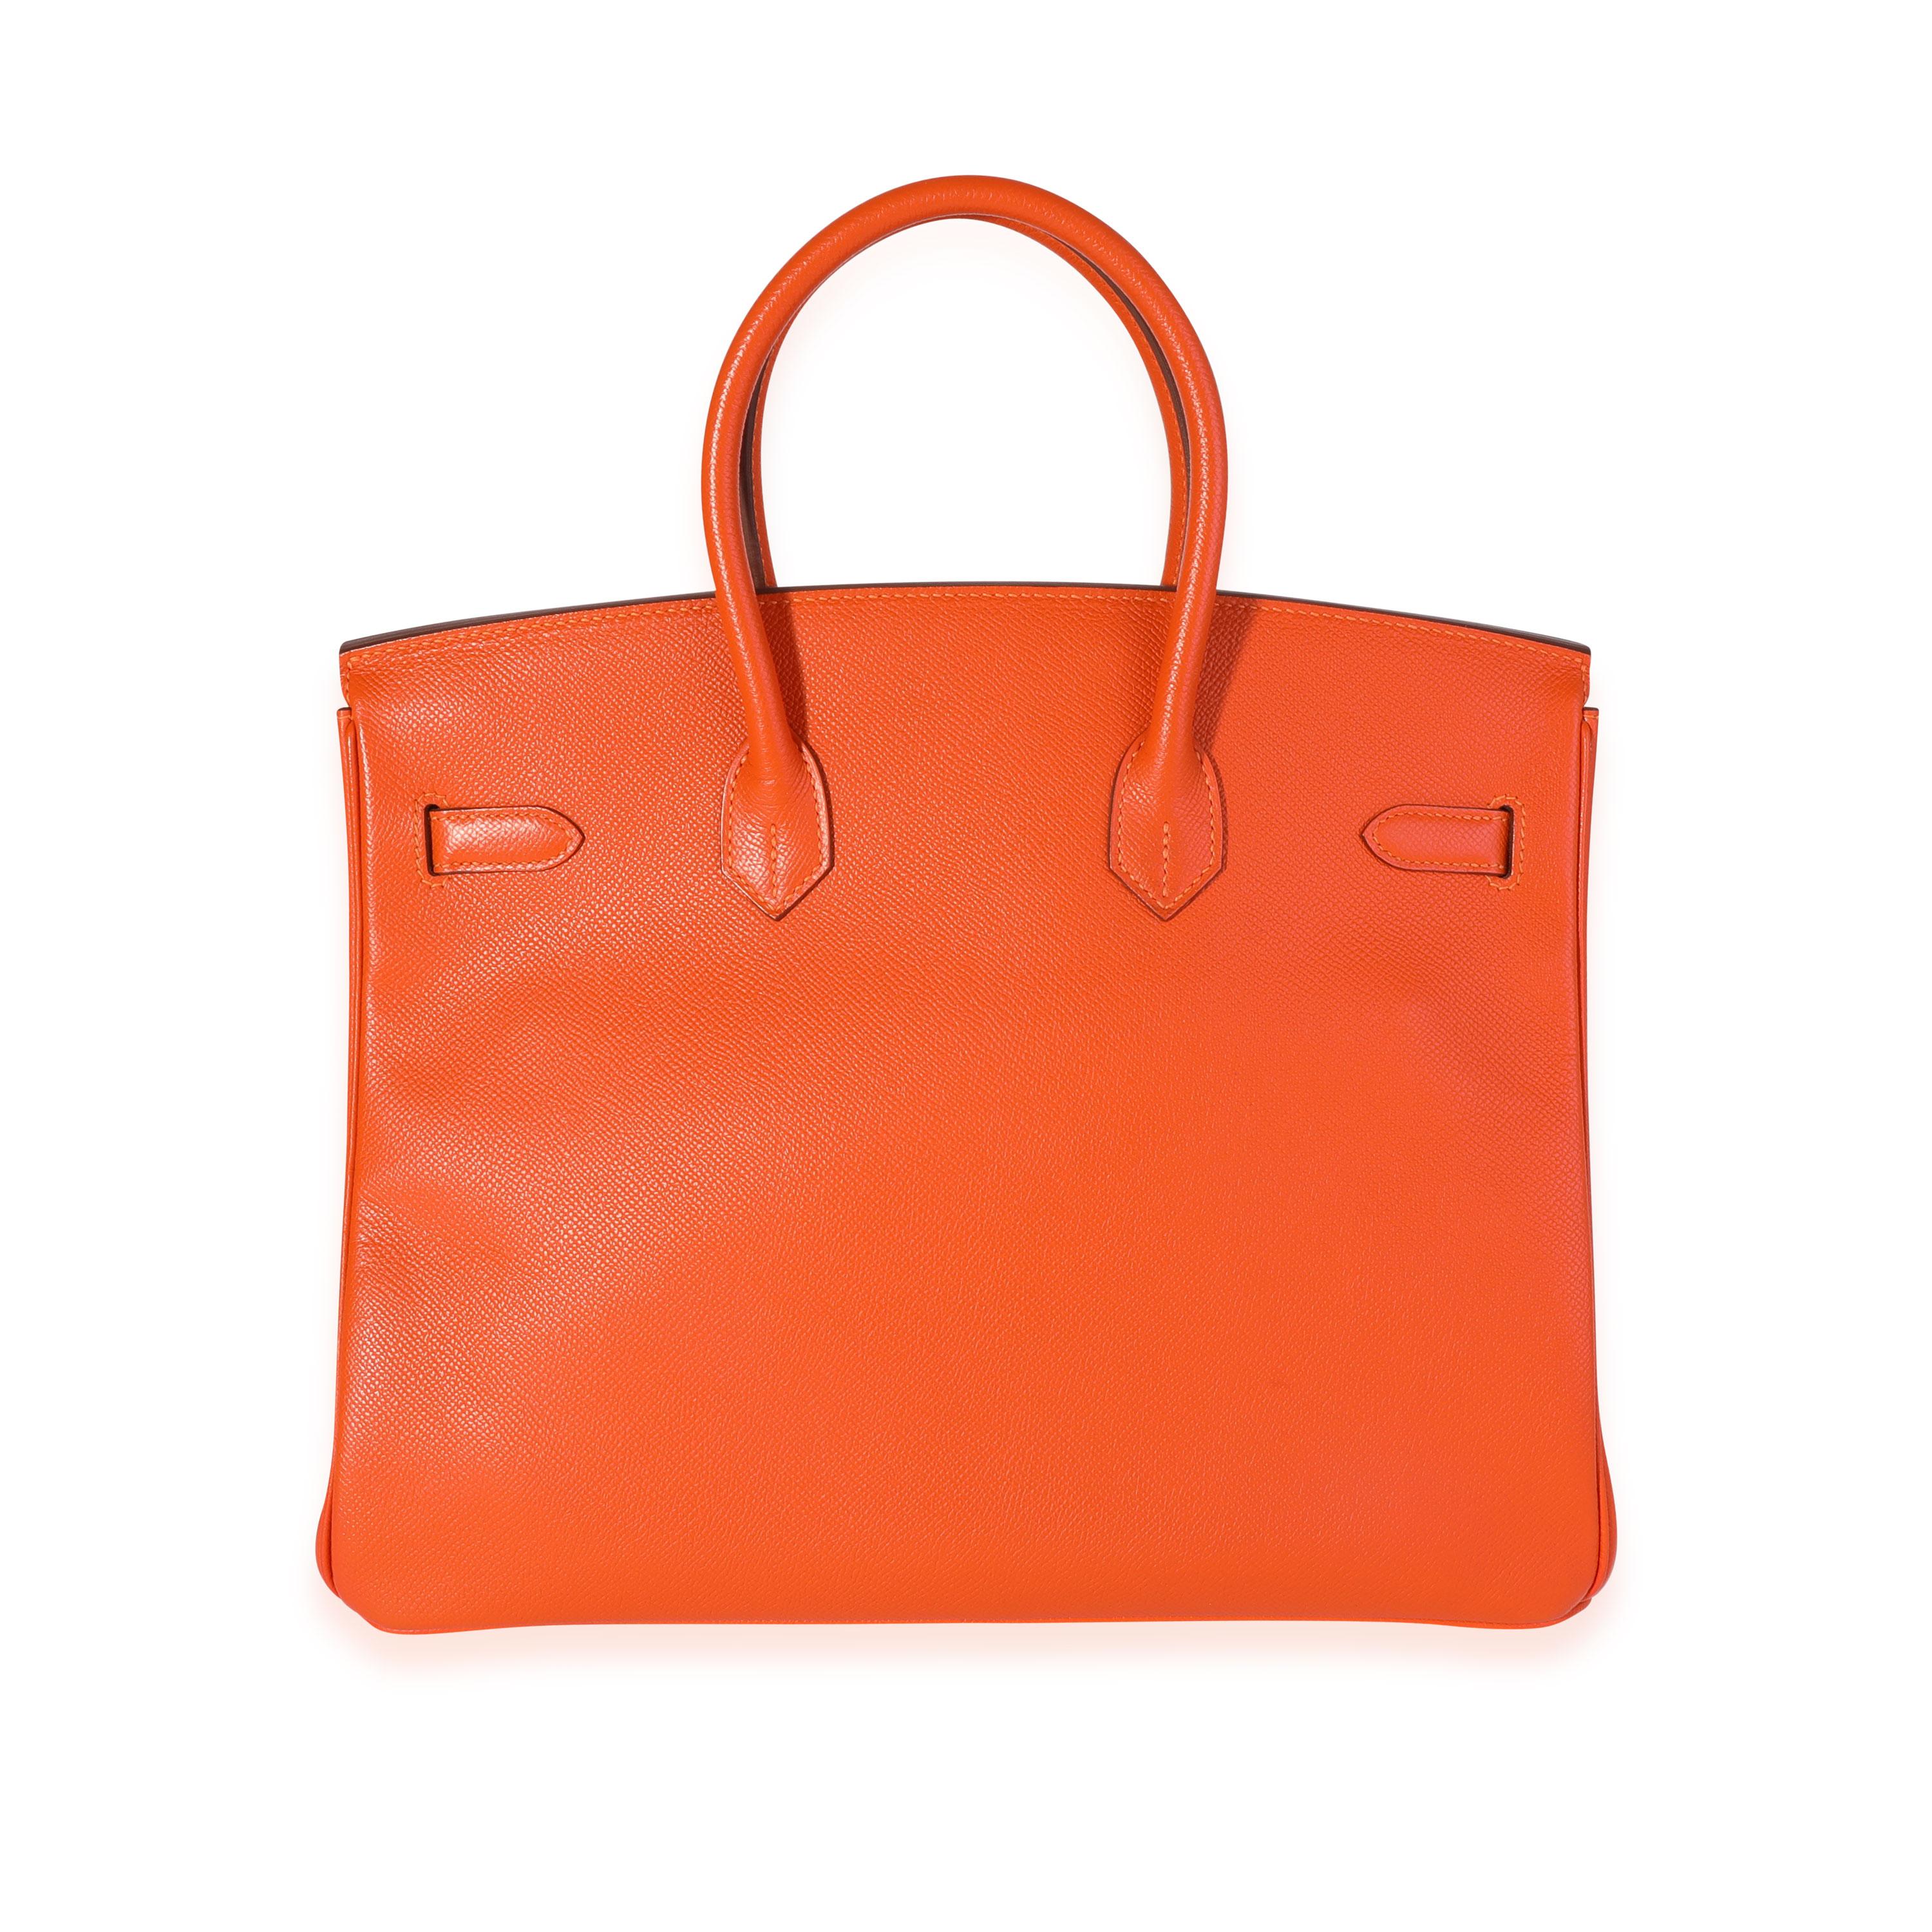 Listing Title: Hermès Feu Epsom Birkin 35 PHW
SKU: 118924
Condition: Pre-owned (3000)
Handbag Condition: Very Good
Condition Comments: Very Good Condition. Plastic on some hardware. Scuffing to corners and to exterior. Scratch at front. Light